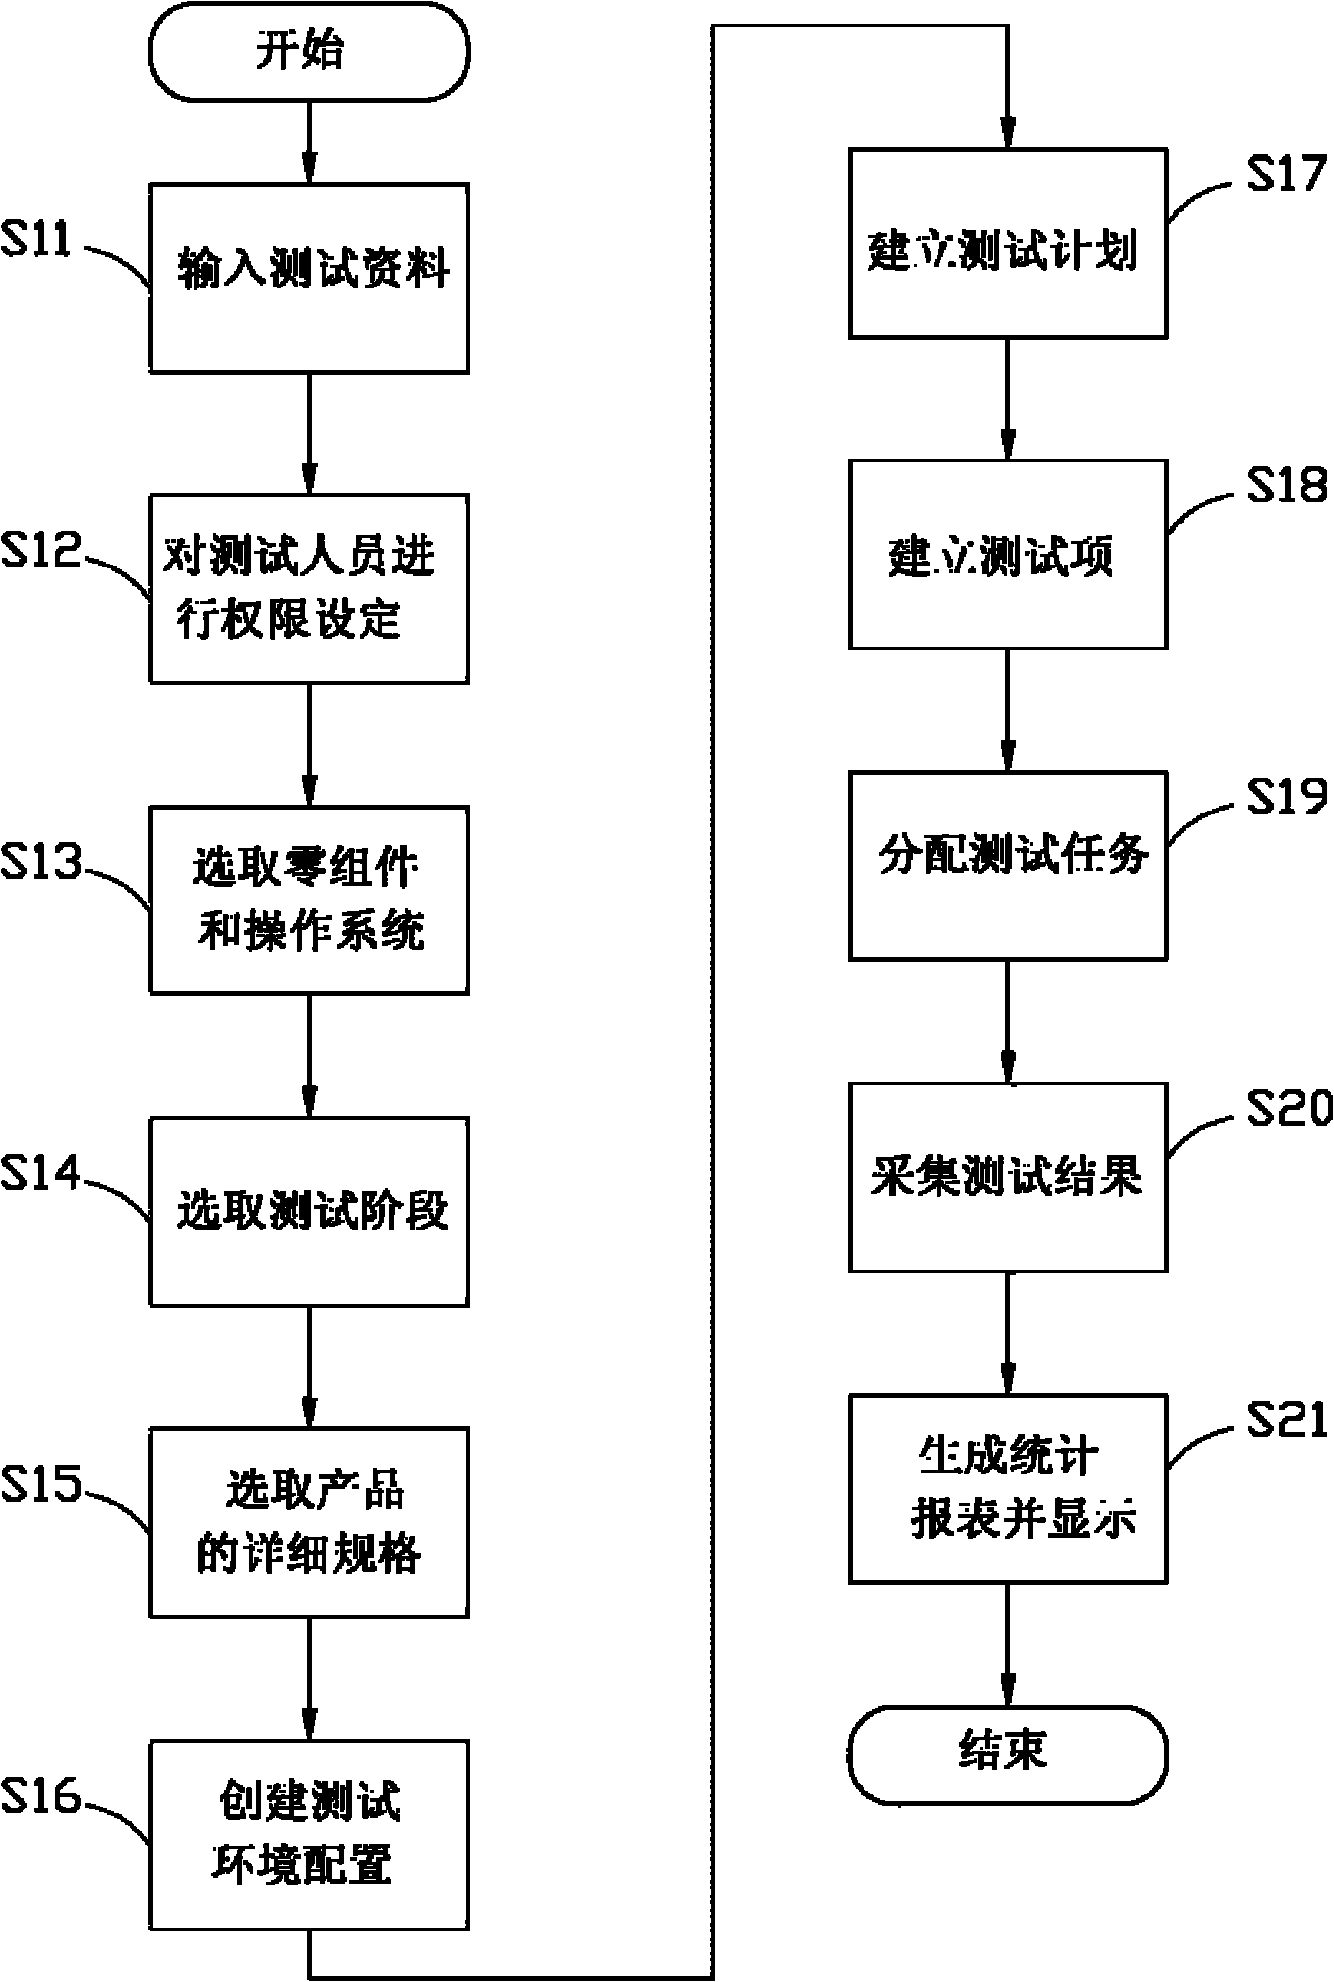 Product test management system and method